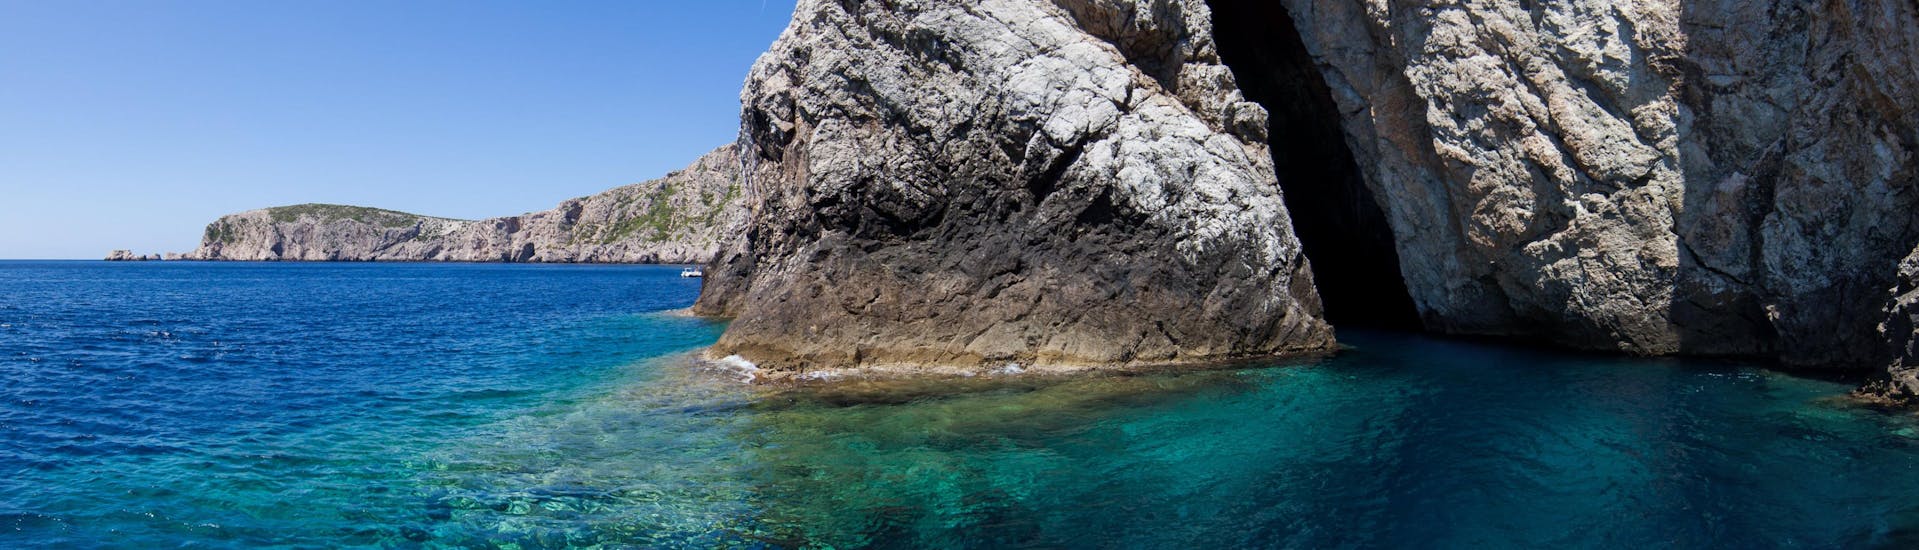 Boat trips to the Blue Cave on Biševo Island are in high demand.